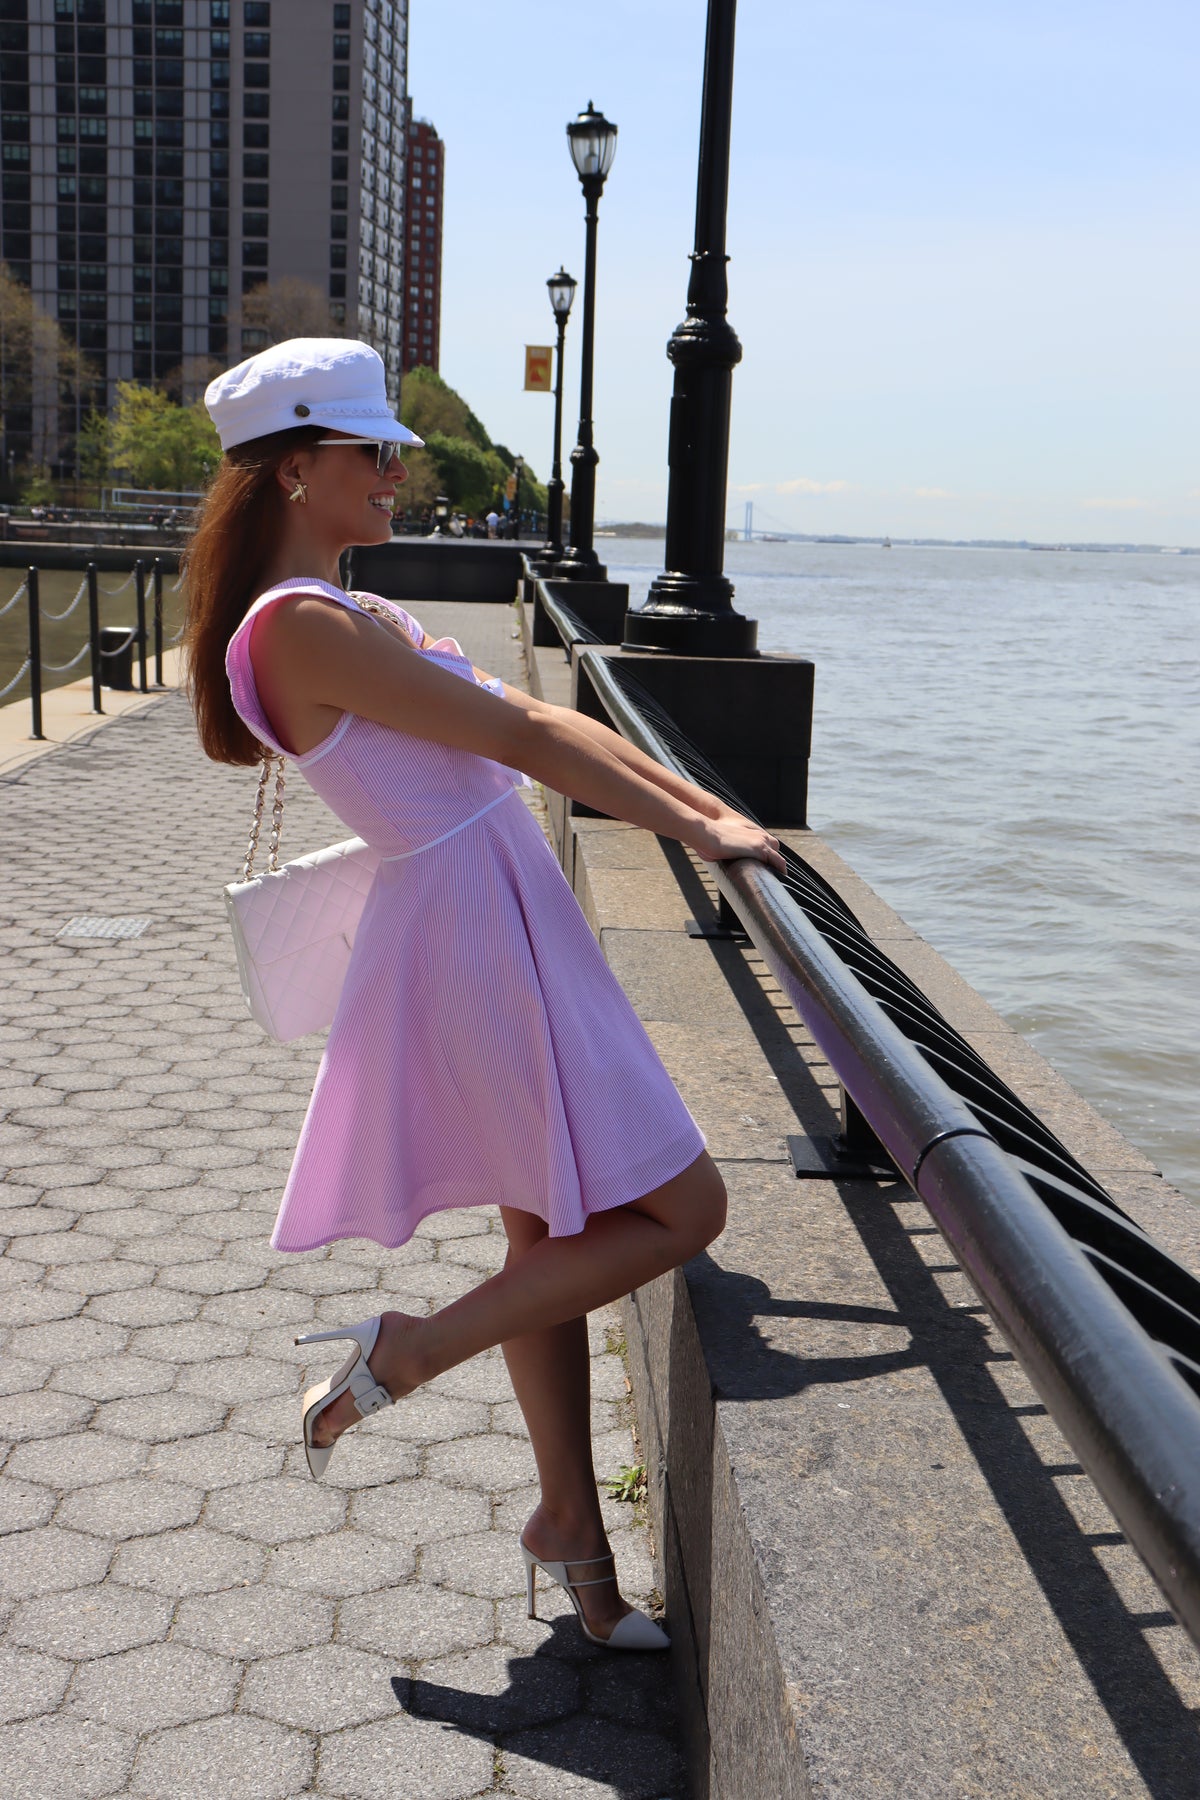 Model wearing a white hat and a pink and white seersucker dress with a white bow looking out to the water.